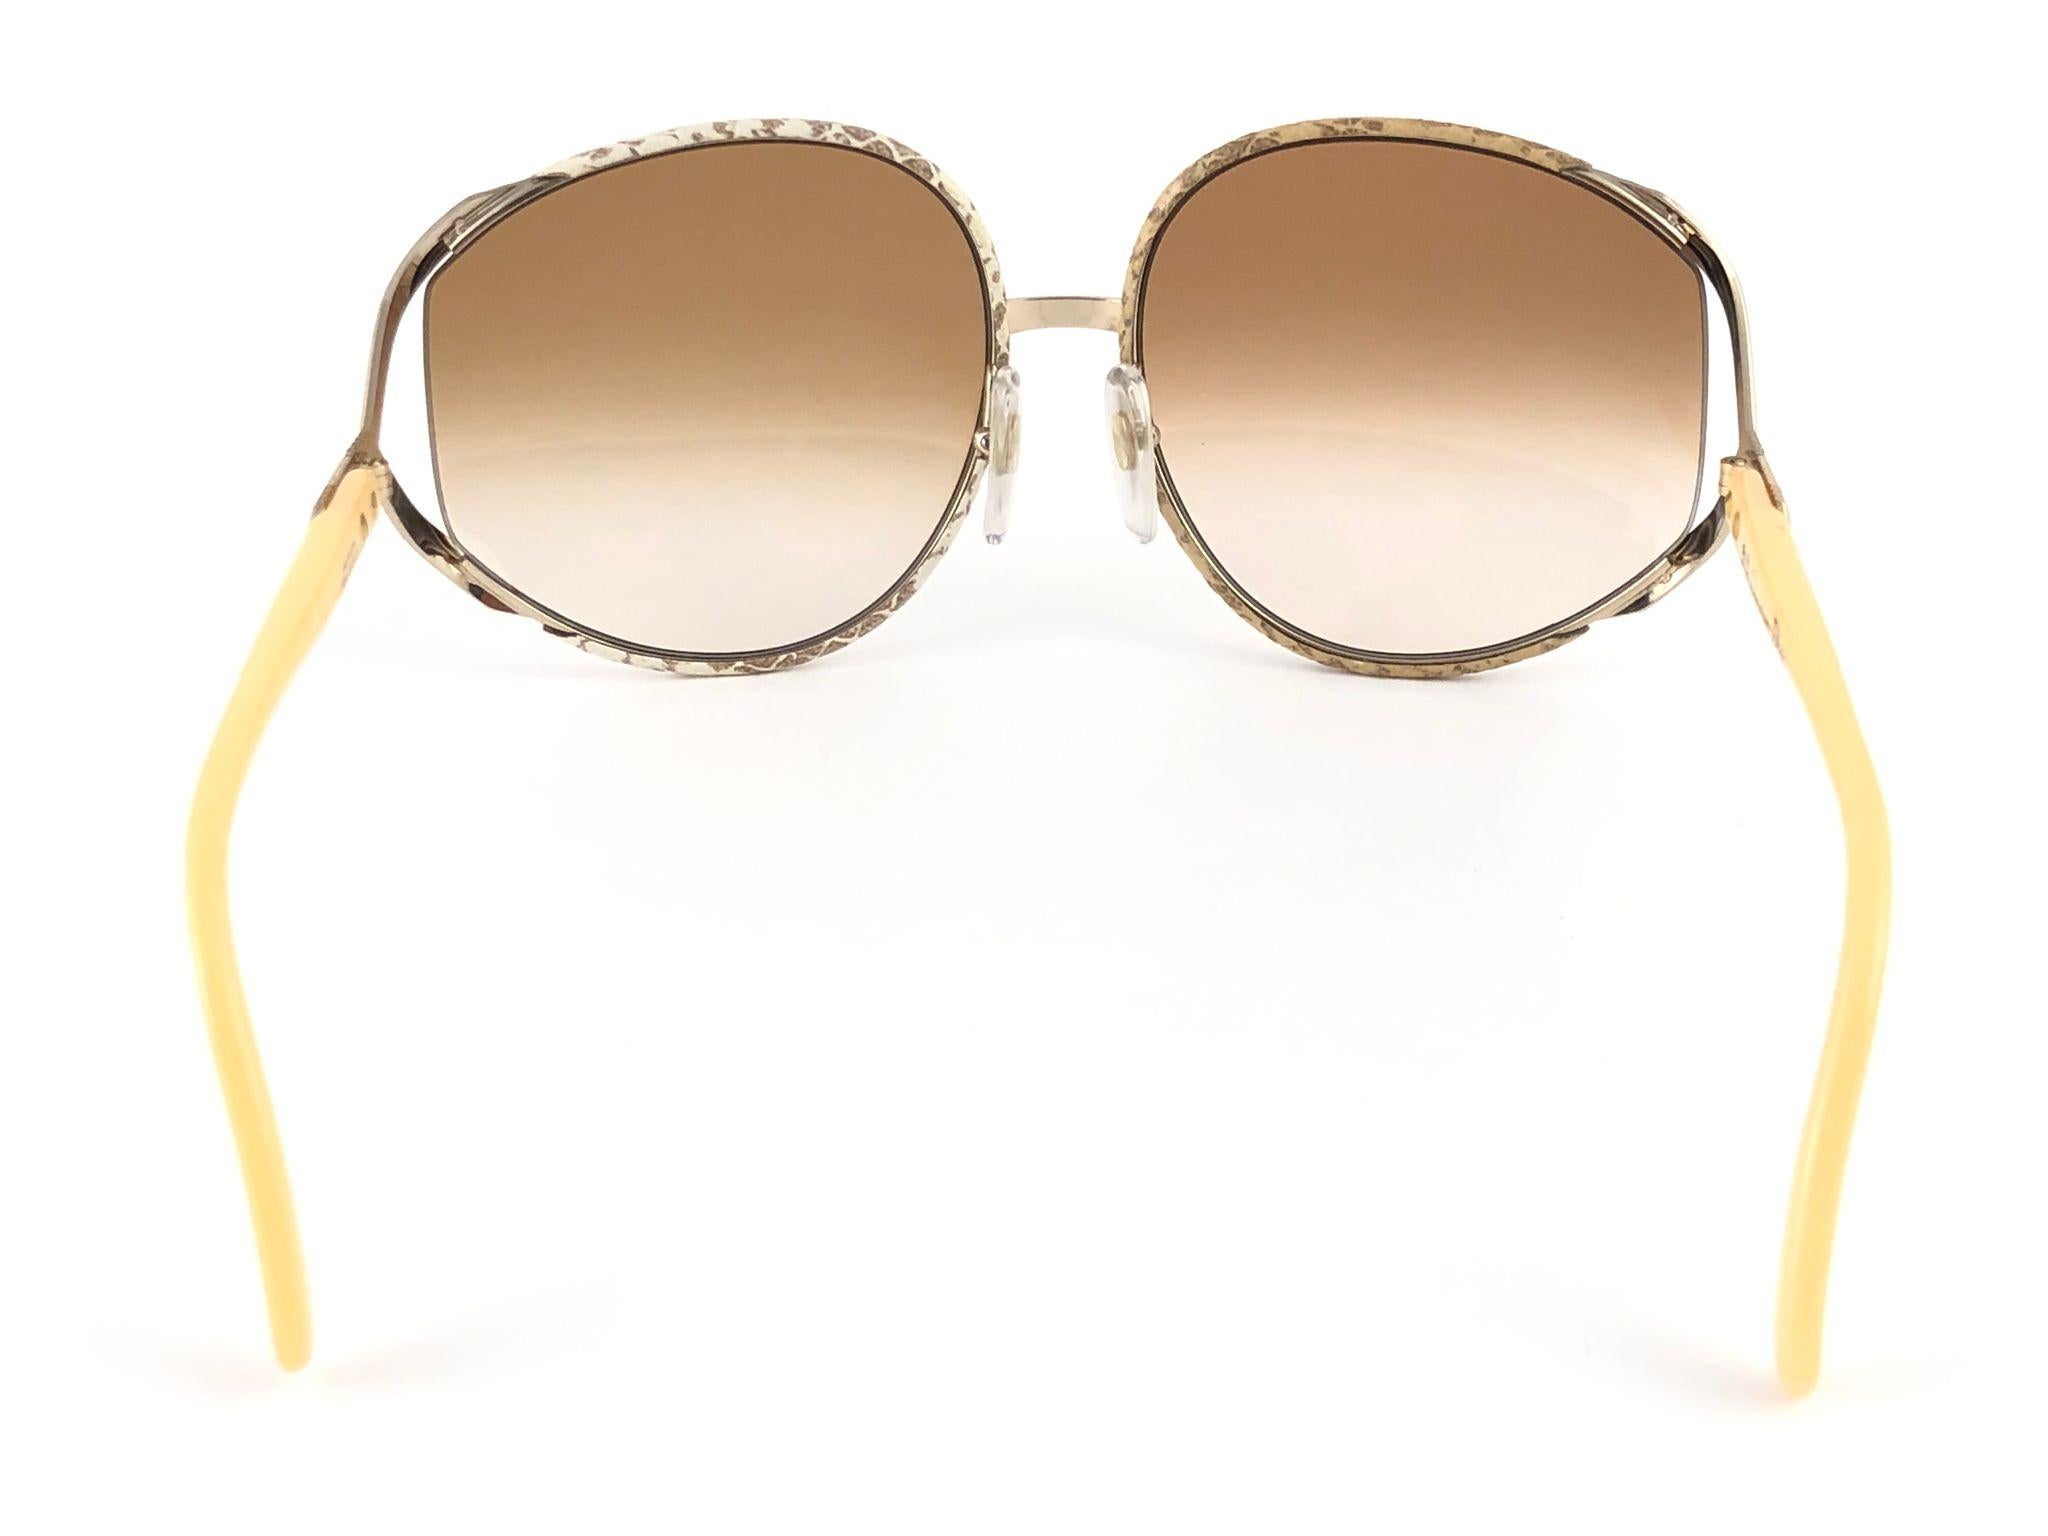 New Vintage Christian Dior 2250 Oversized Python Lined Sunglasses  In New Condition For Sale In Baleares, Baleares